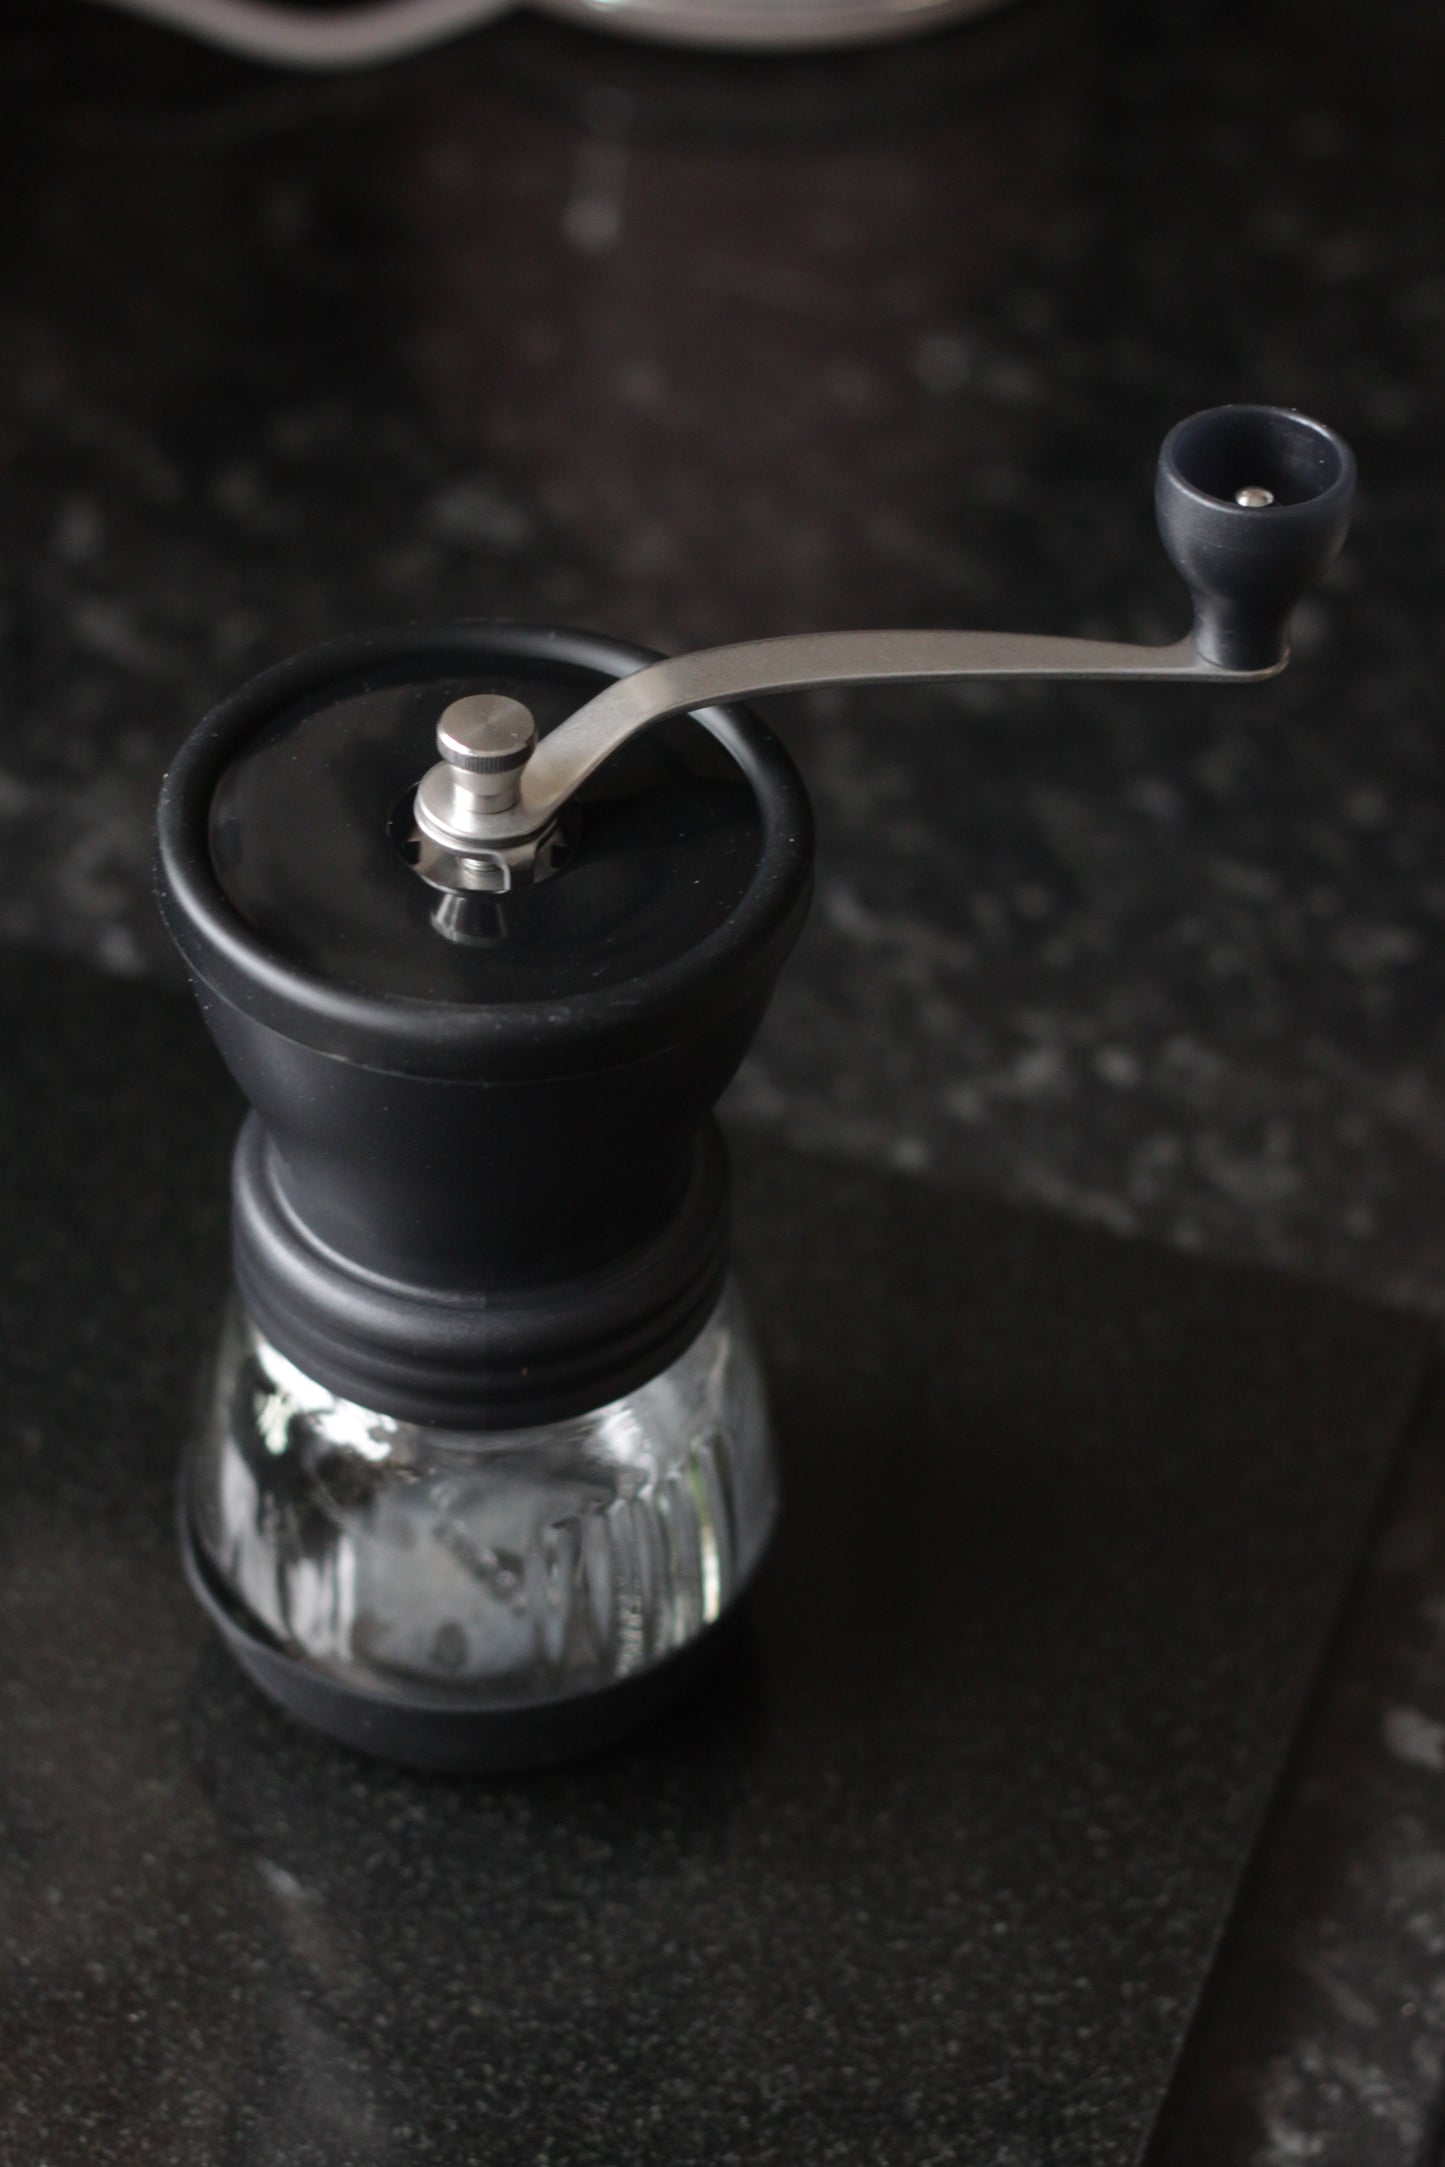 Hario Skerton Plus Coffee Grinder. Perfect for on the go or at home